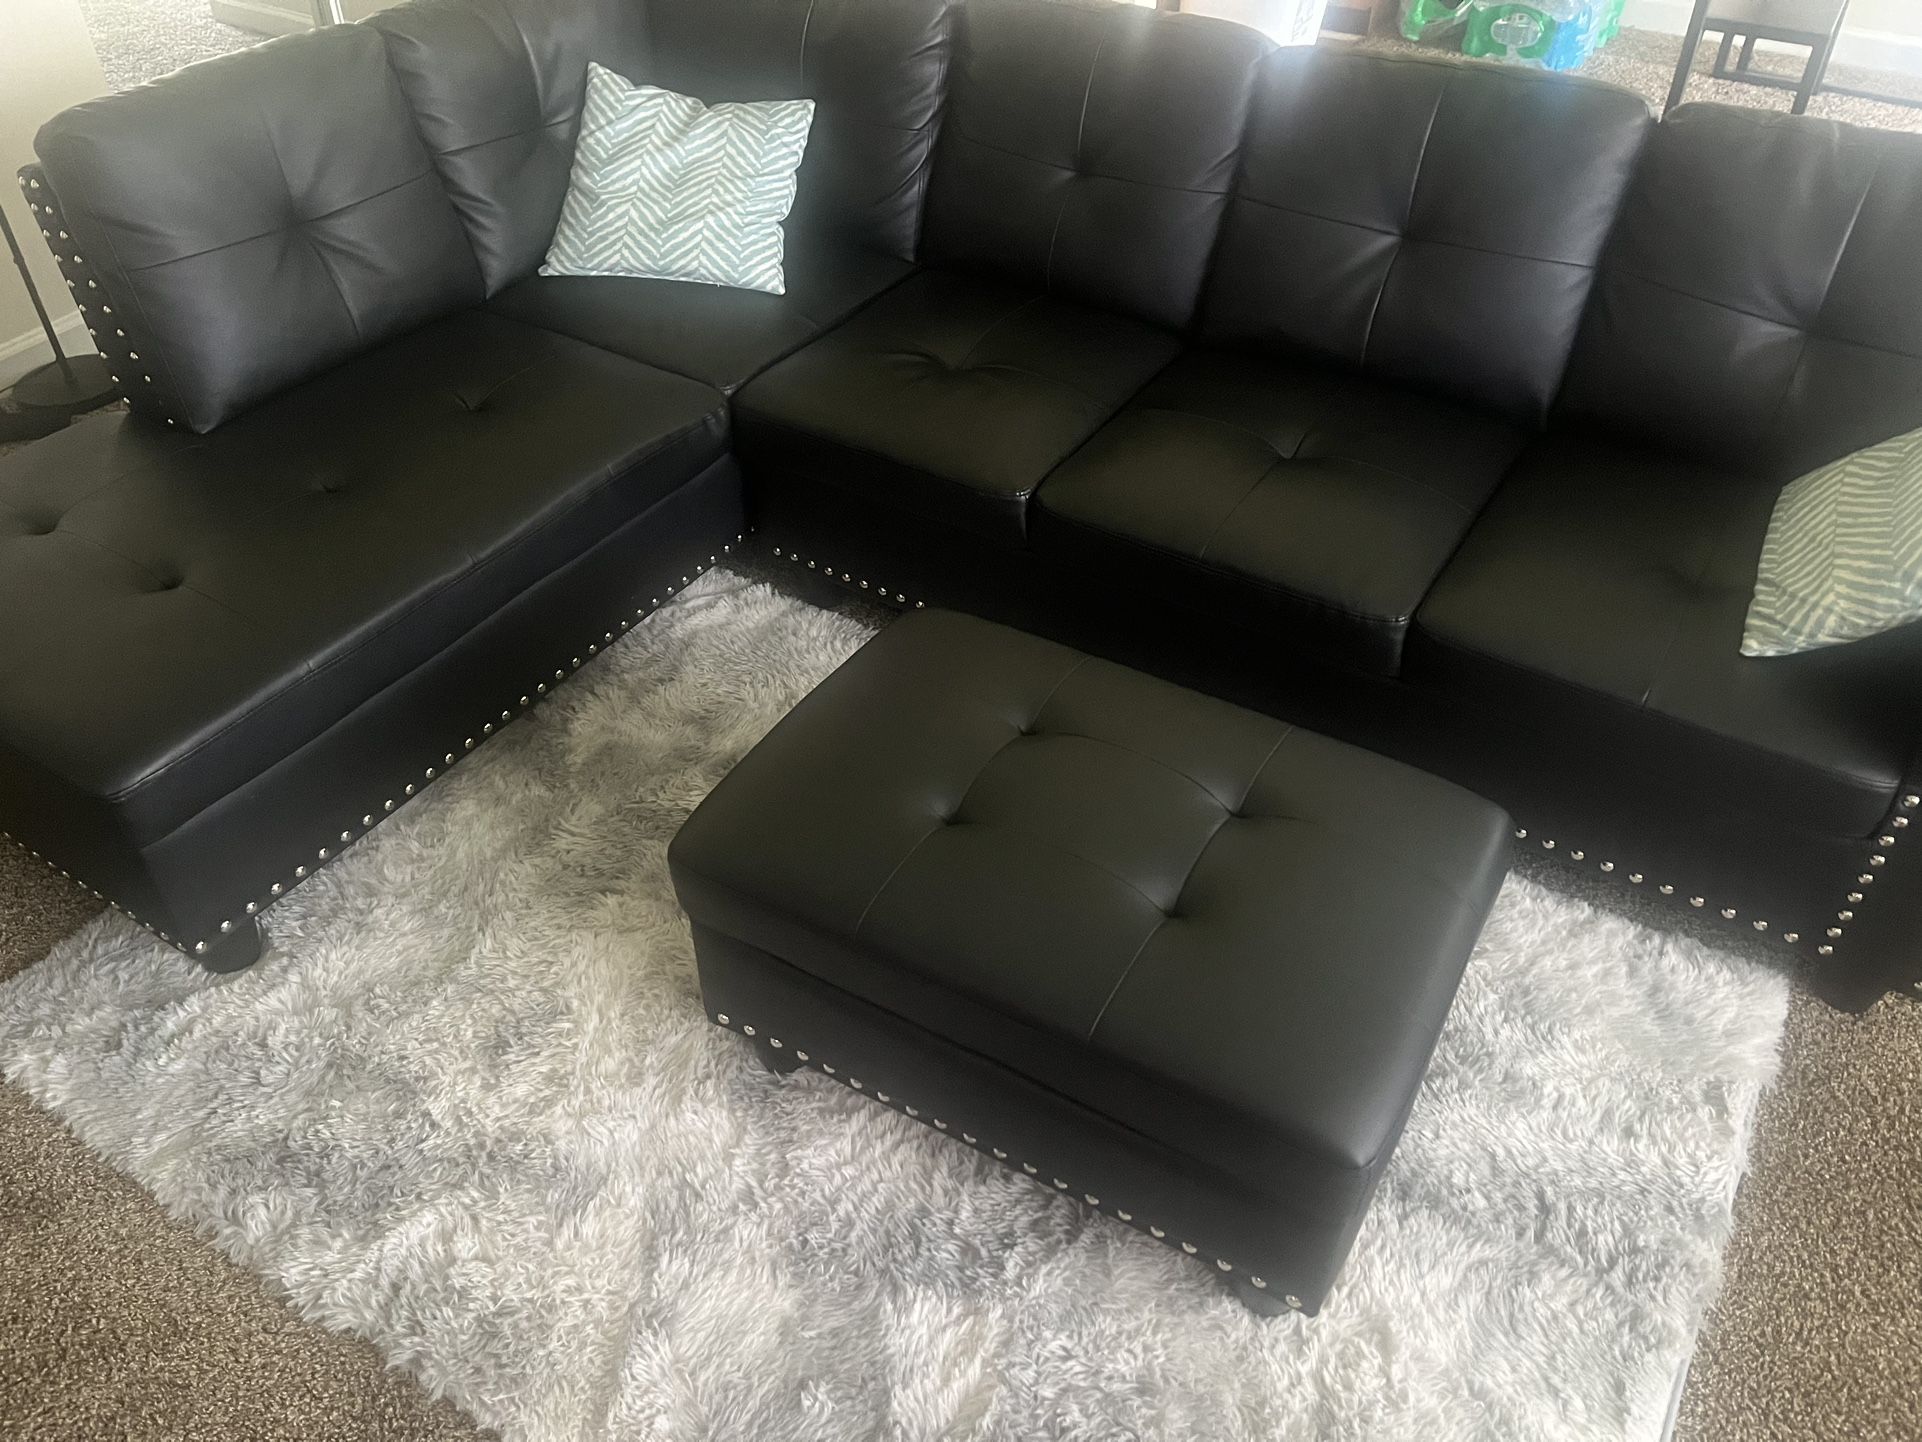 New Couch With Cup Holders And Ottoman